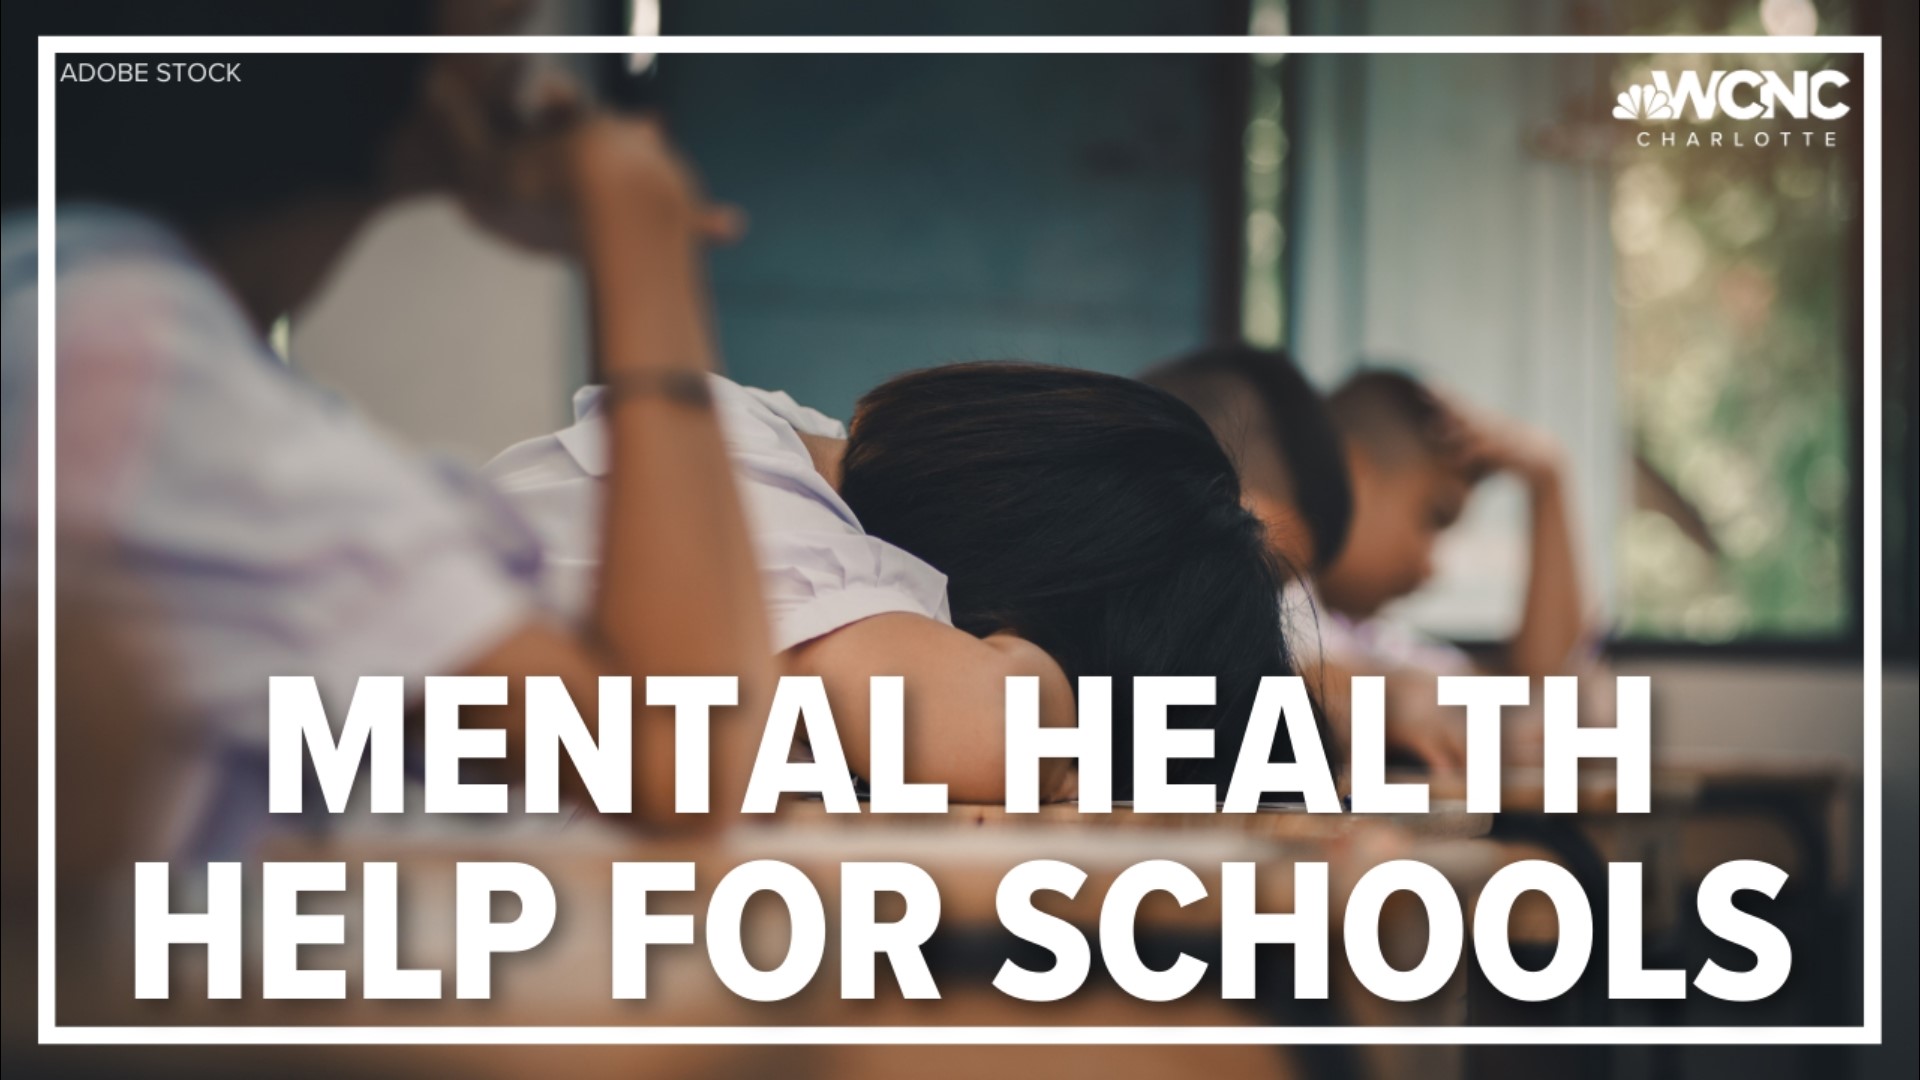 Beginning this winter, the North Carolina Psychiatry Access Line (NC-PAL) will start providing mental and behavioral health support to eligible public schools